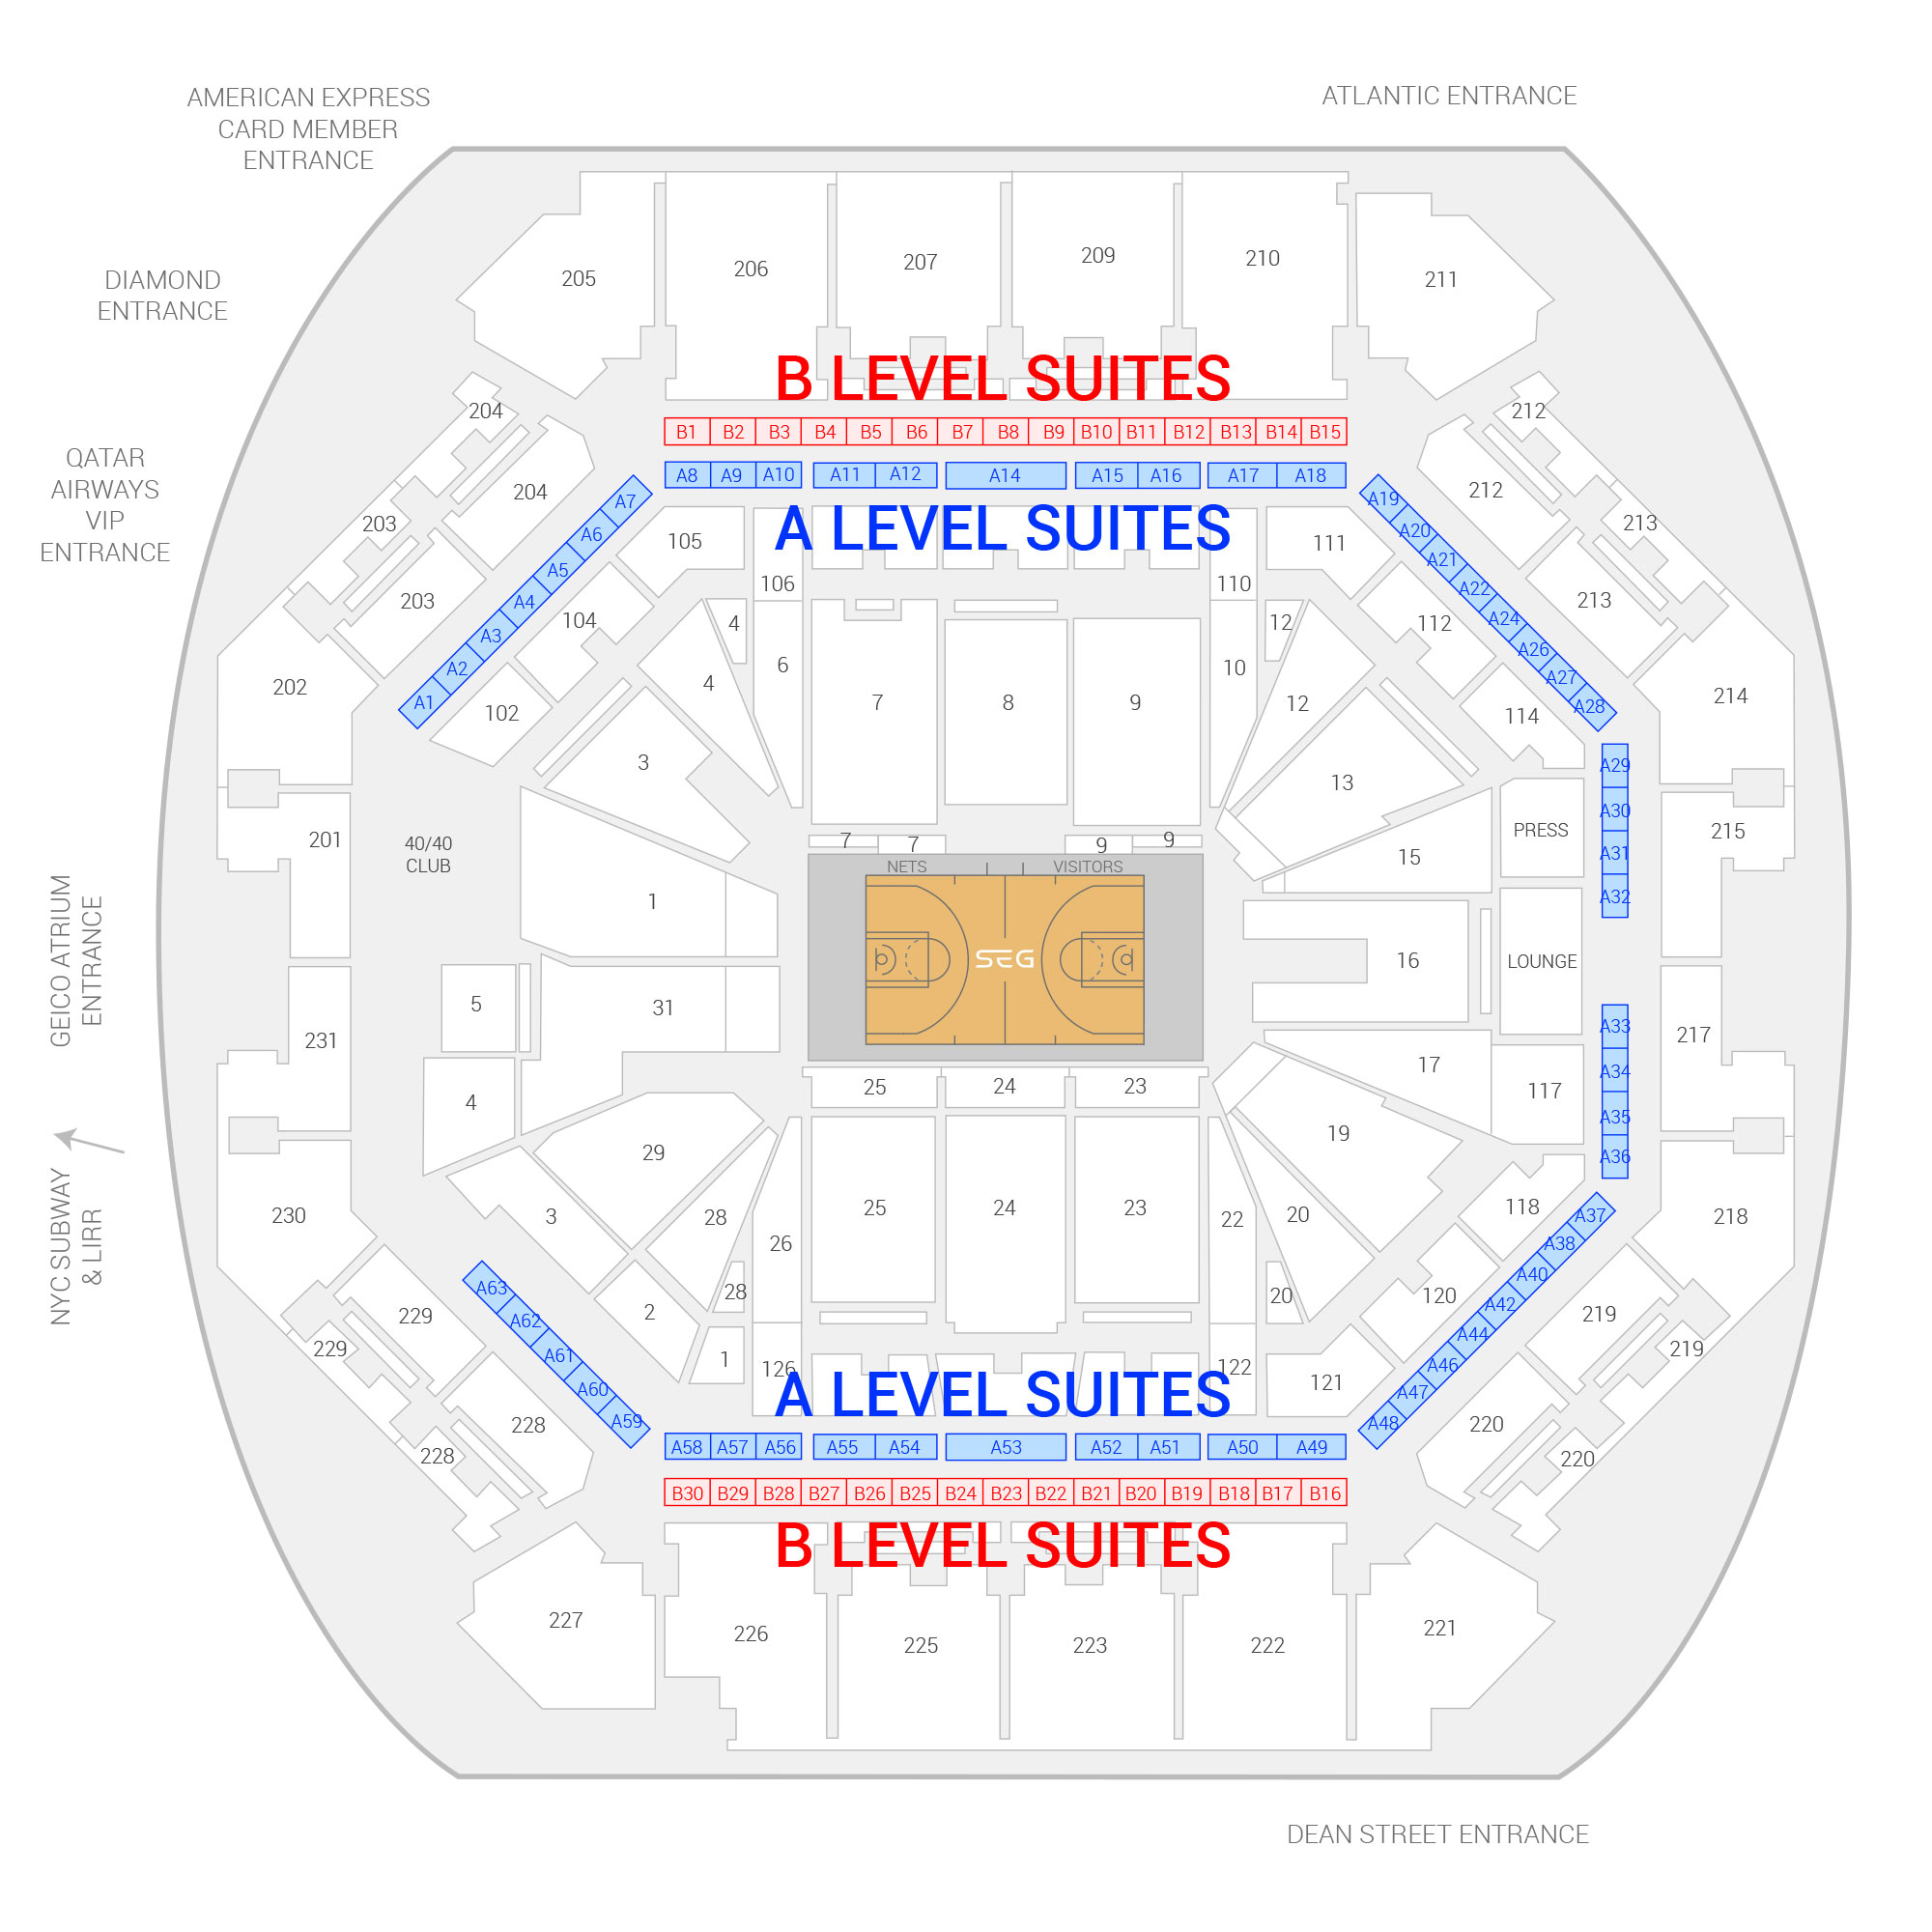 Barclays Center / Brooklyn Nets Suite Map and Seating Chart